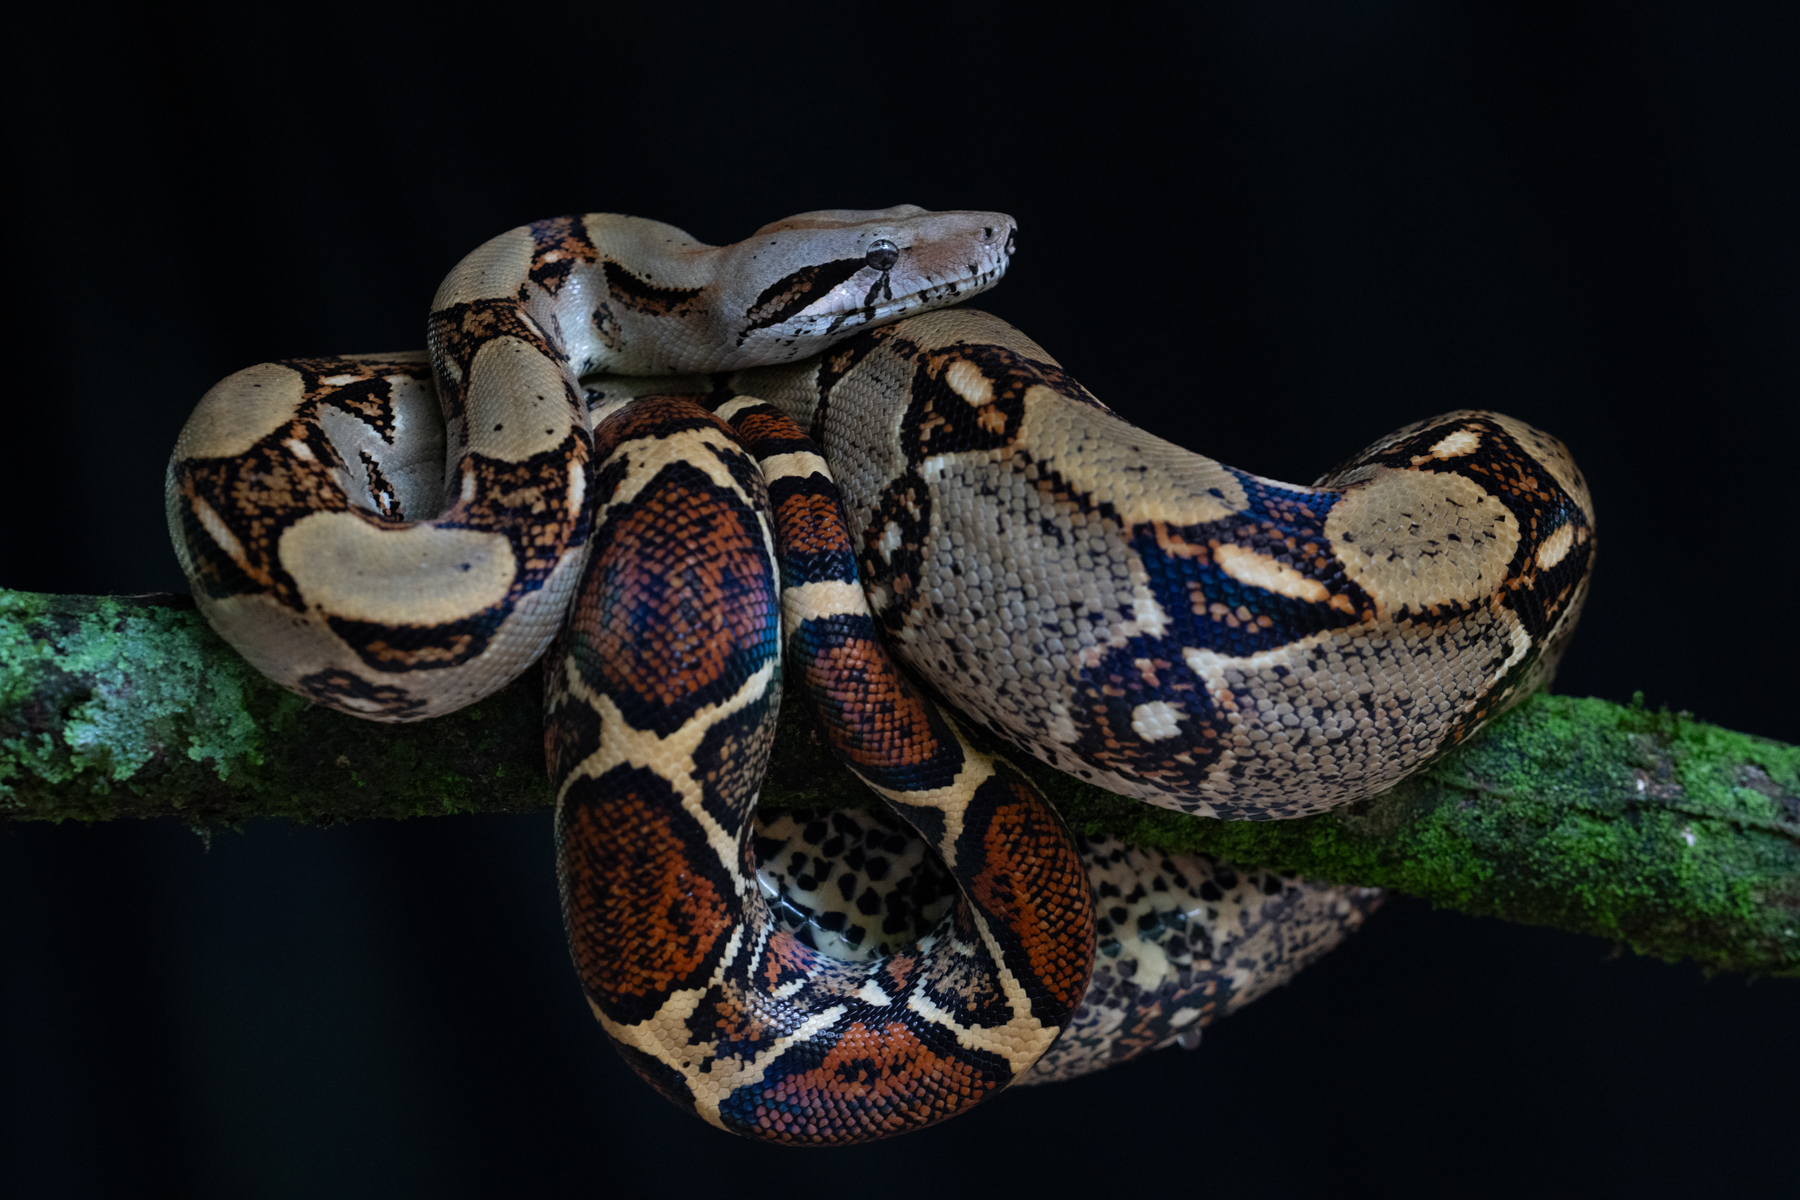 Boa's truly are beautiful snakes (image by Inger Vandyke)